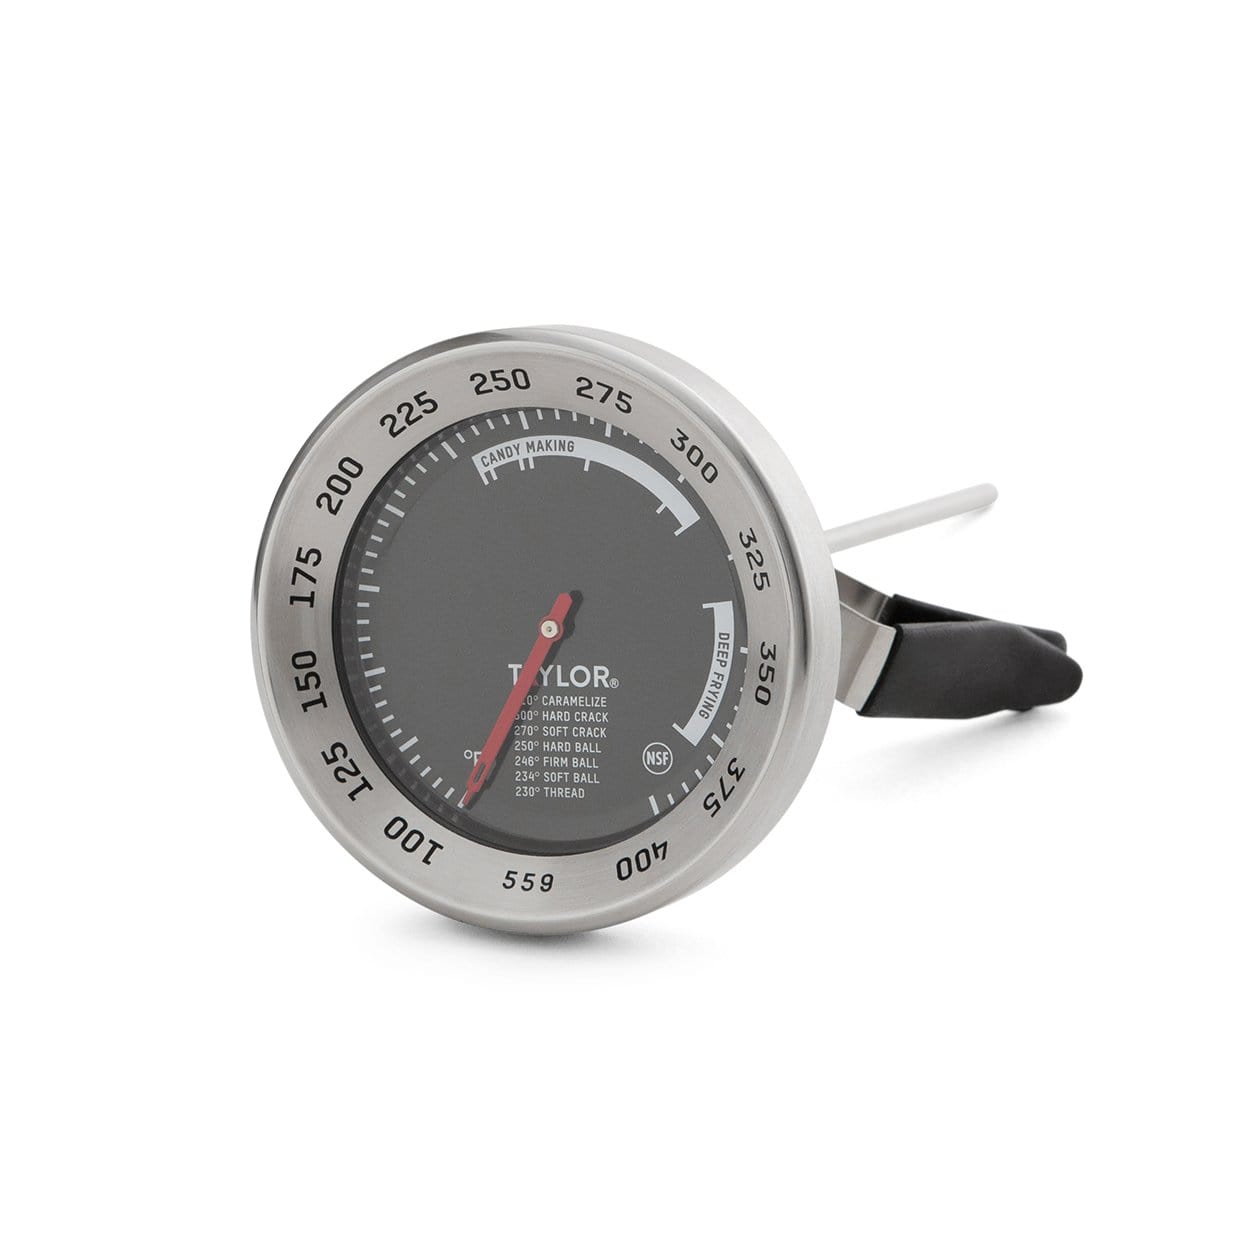 Instant Read Analog Meat Thermometer - Oven Safe Model 552 by